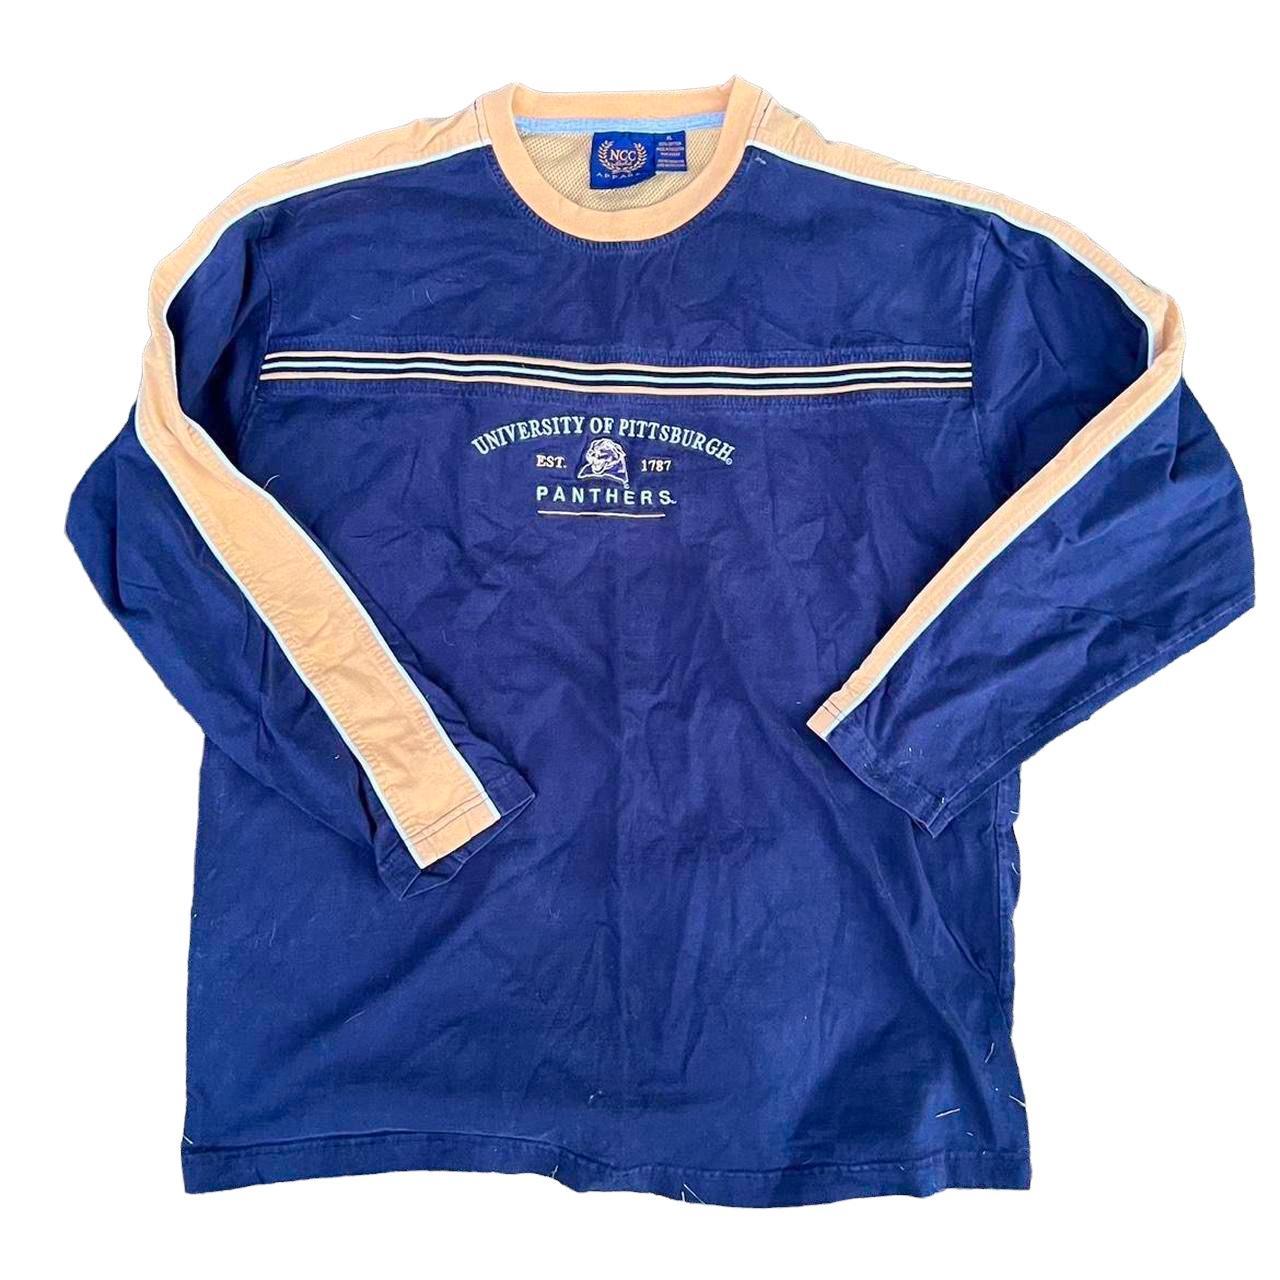 Product Image 2 - 90s Vintage Pitt Panthers embroidered